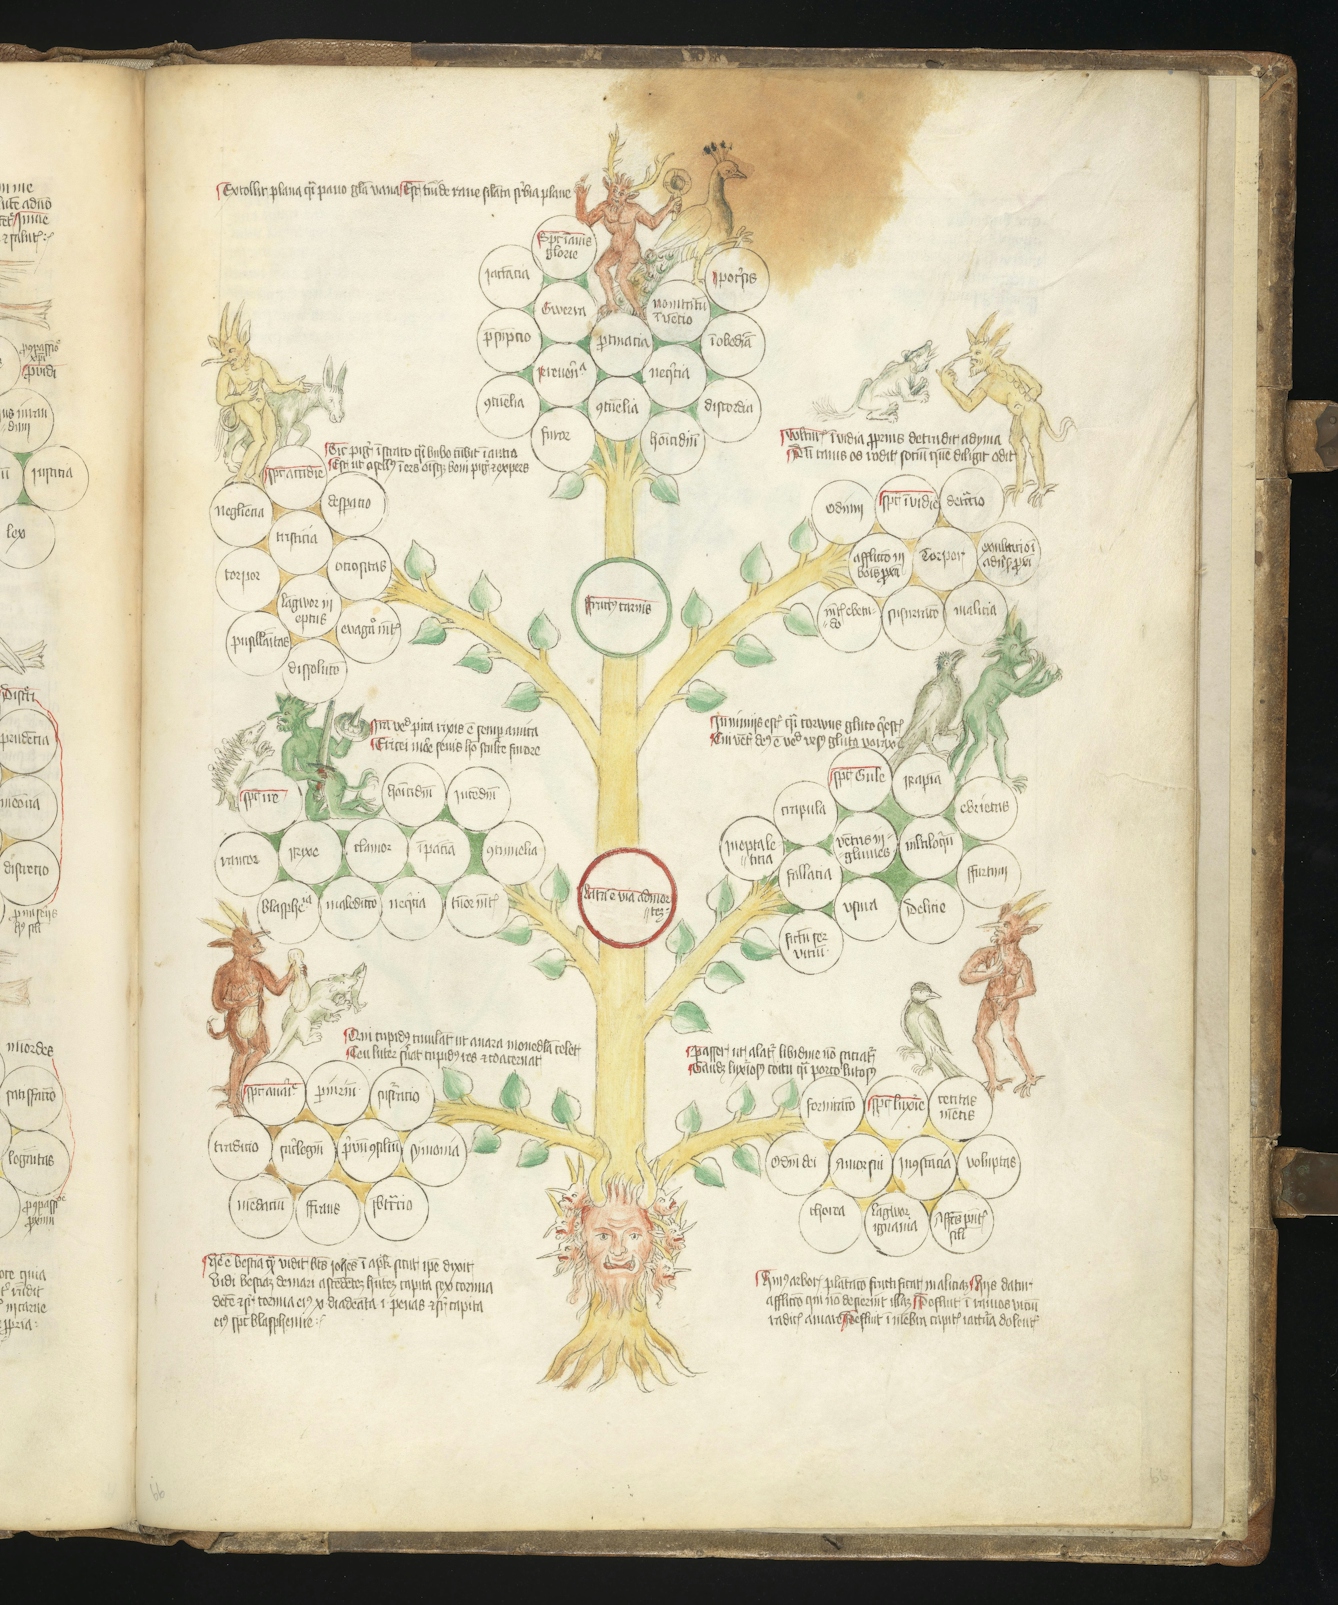 Image of a manuscript page with a diagram showing a tree with a devilish face at its base, with sevel branches with imps or demons representing the seven sins. 